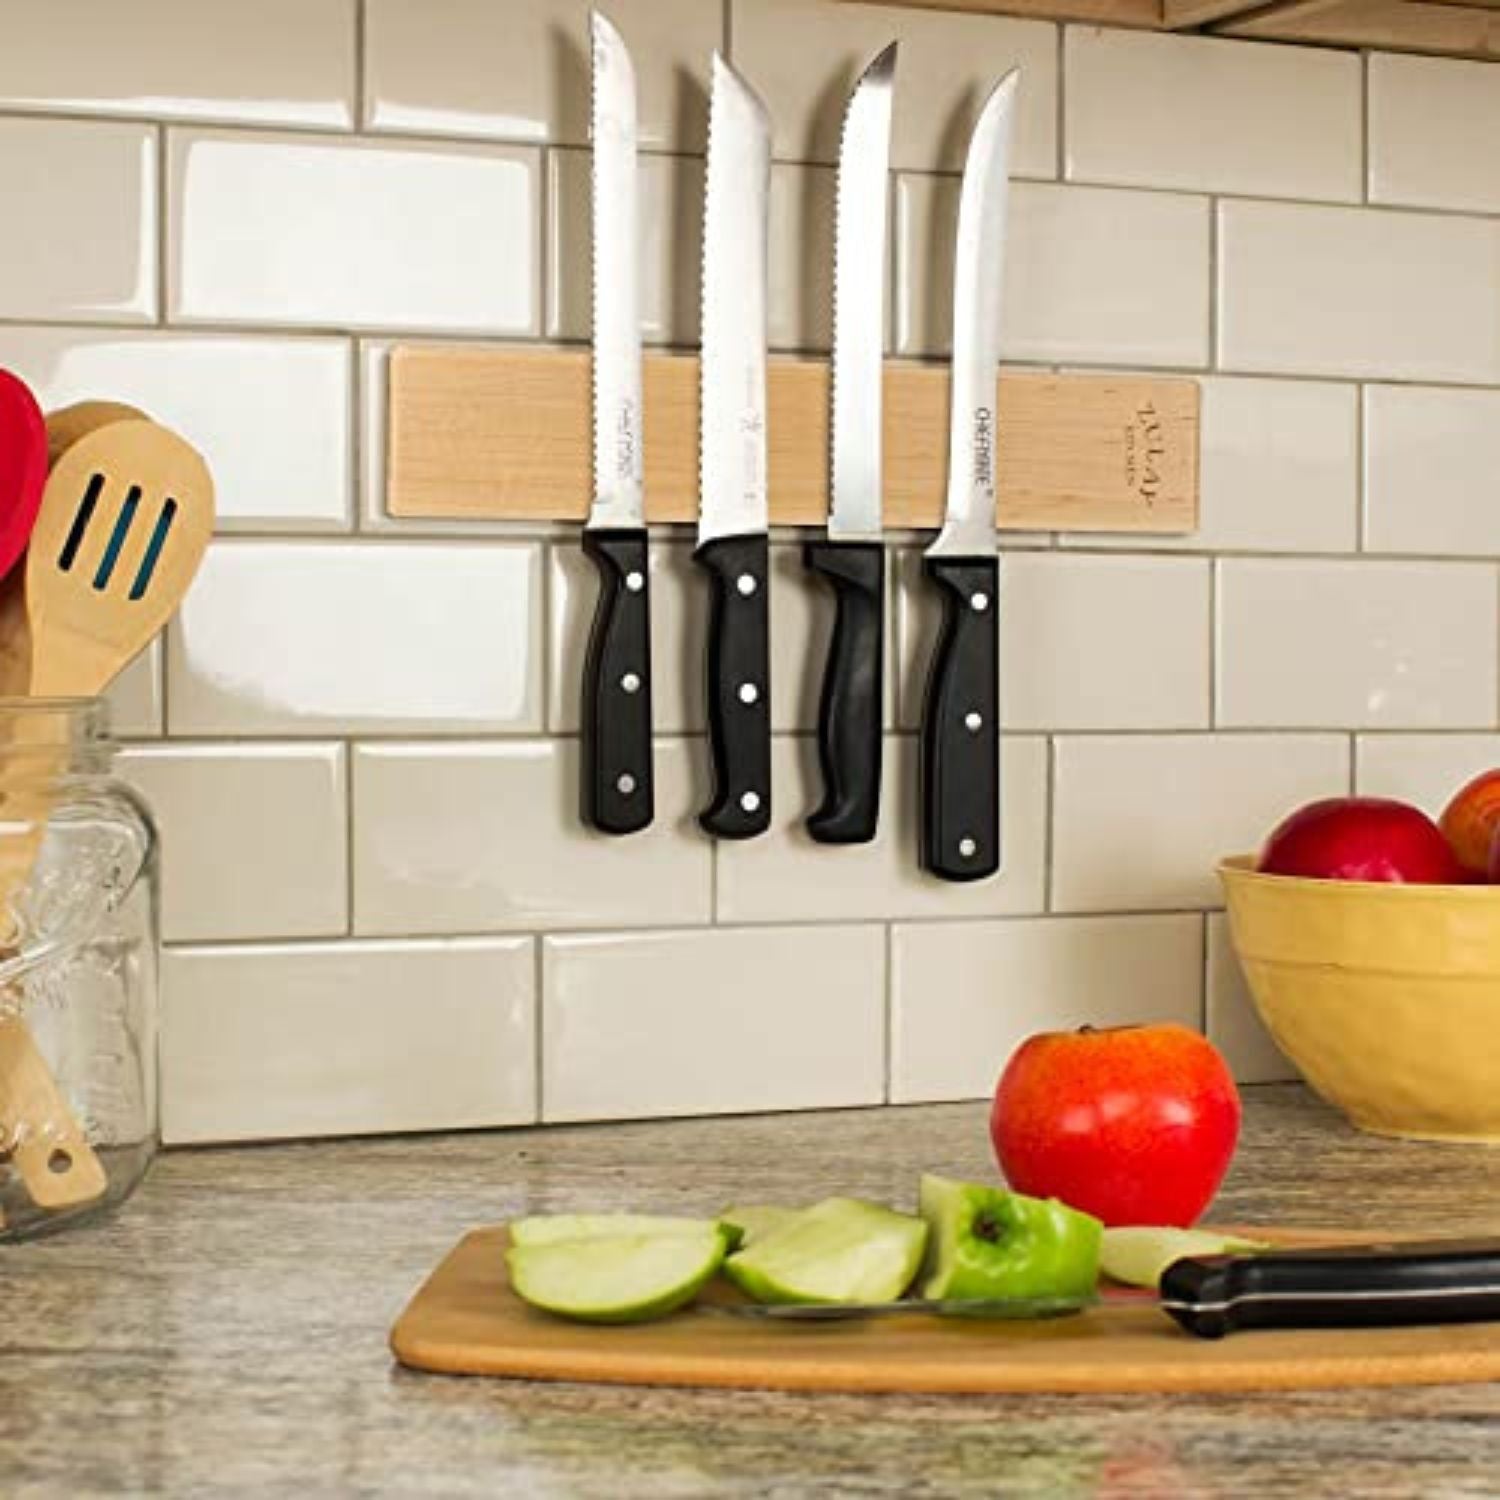  Zulay (12 Inch) Stainless Steel Magnetic Knife Holder For Wall  - Powerful Knife Magnetic Strip With Extra Hanging Hooks - Wall Mount  Magnetic Knife Strip & Organizer For Kitchen & Tools (